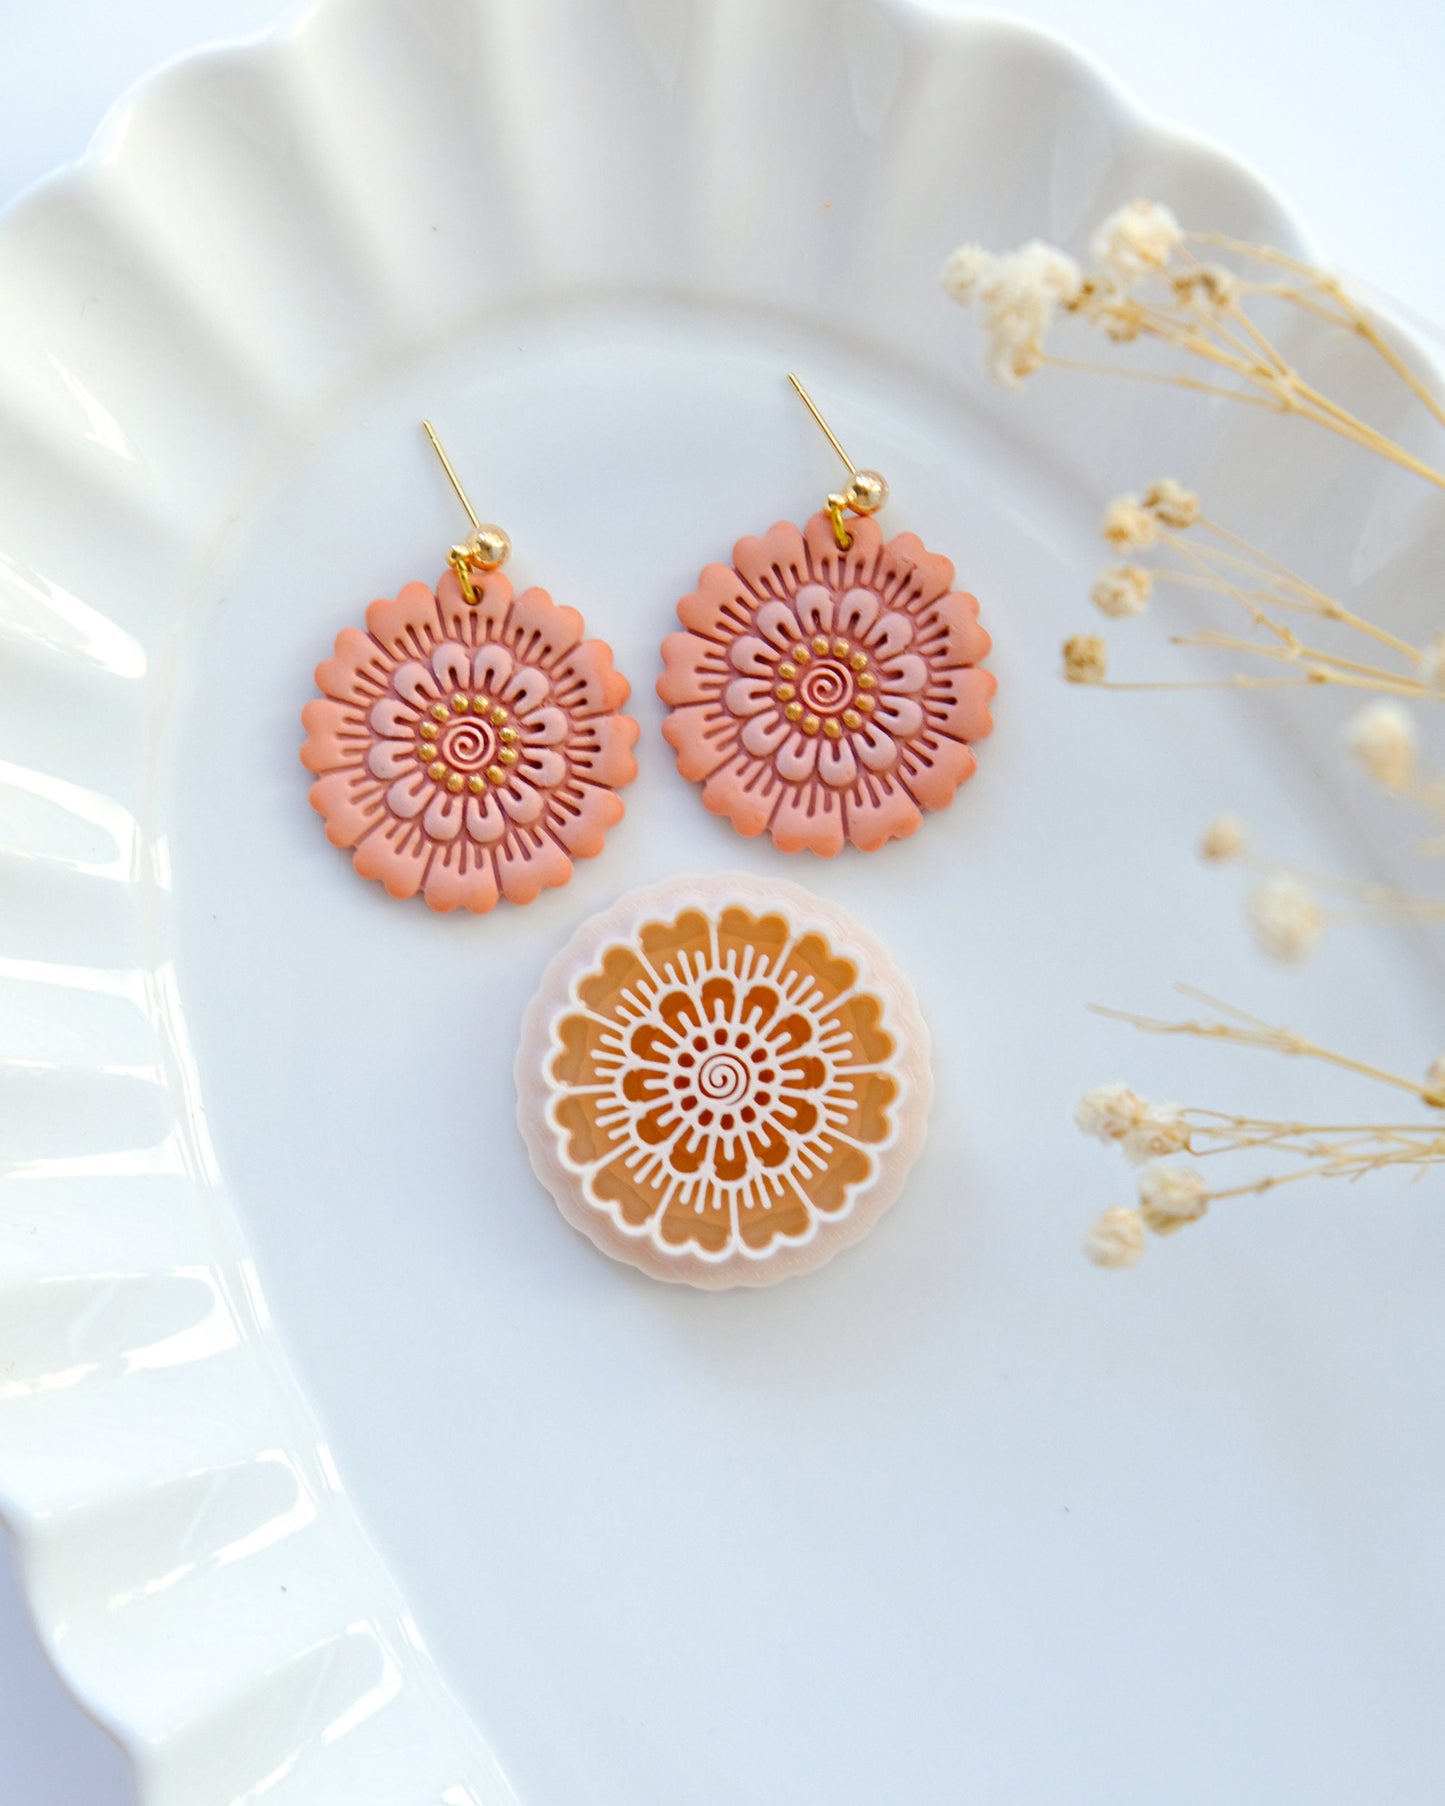 Boho Flower Polymer Clay Cutters | Spring Clay Cutters | Polymer Clay Tool | Clay Earring Cutter | 3d Printed Cutters